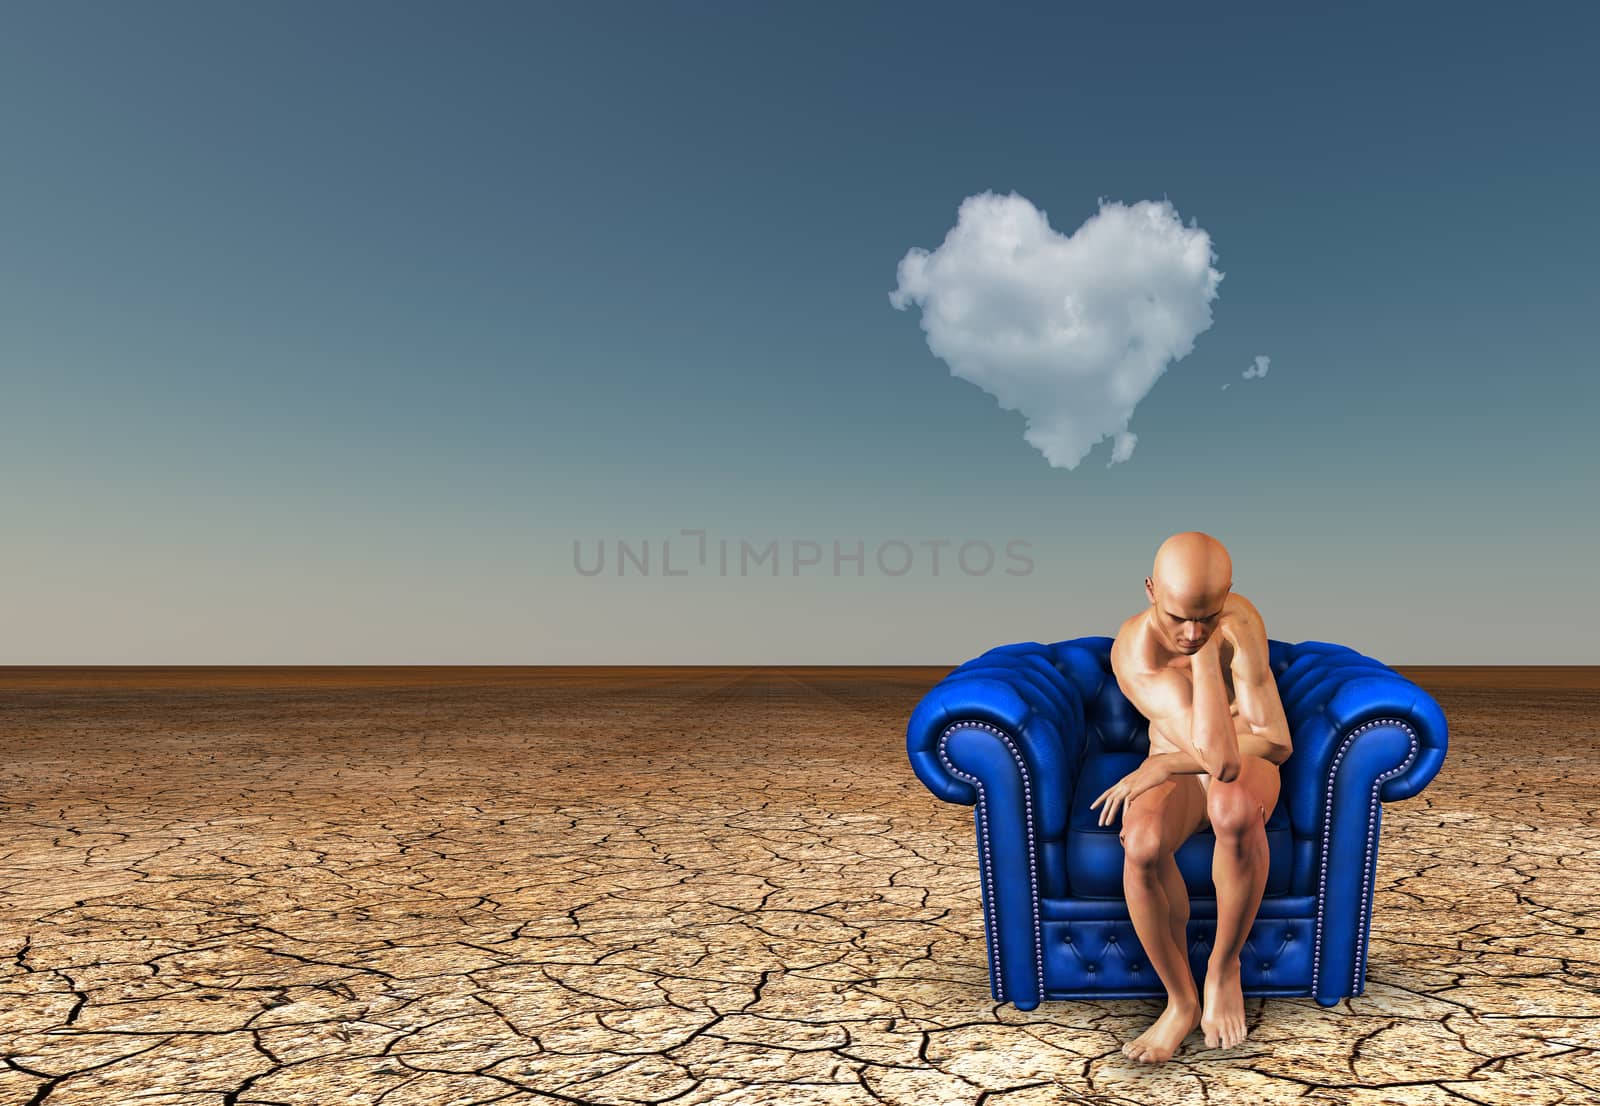 Man contemplates in desert with heart shaped cloud